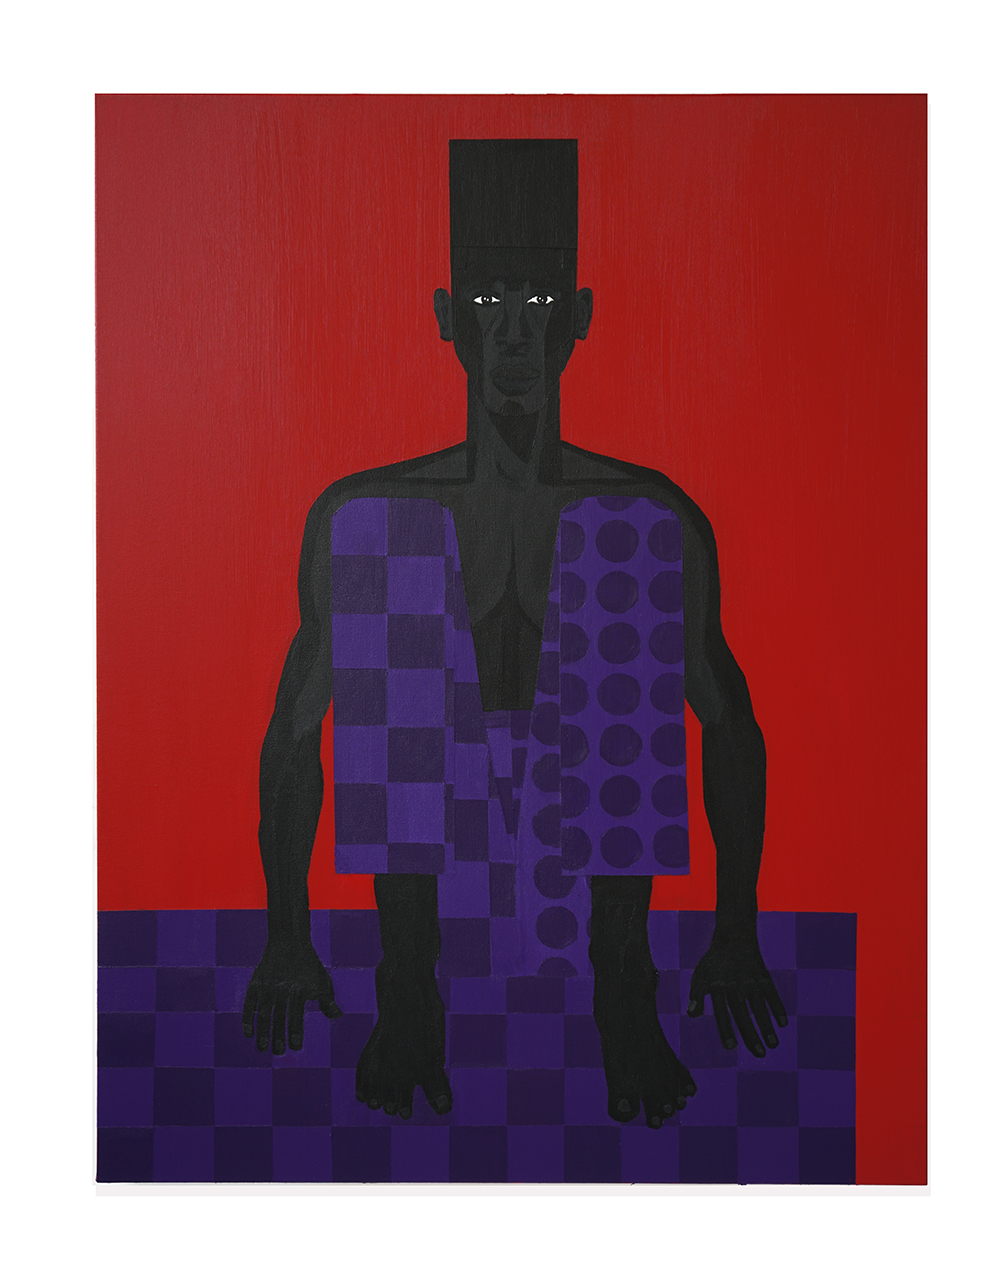 Jon Key.<em> The Man in the Red Room No. 2</em>, 2019. Acrylic on canvas, 48 x 36 inches (121.9 x 91.4 cm)